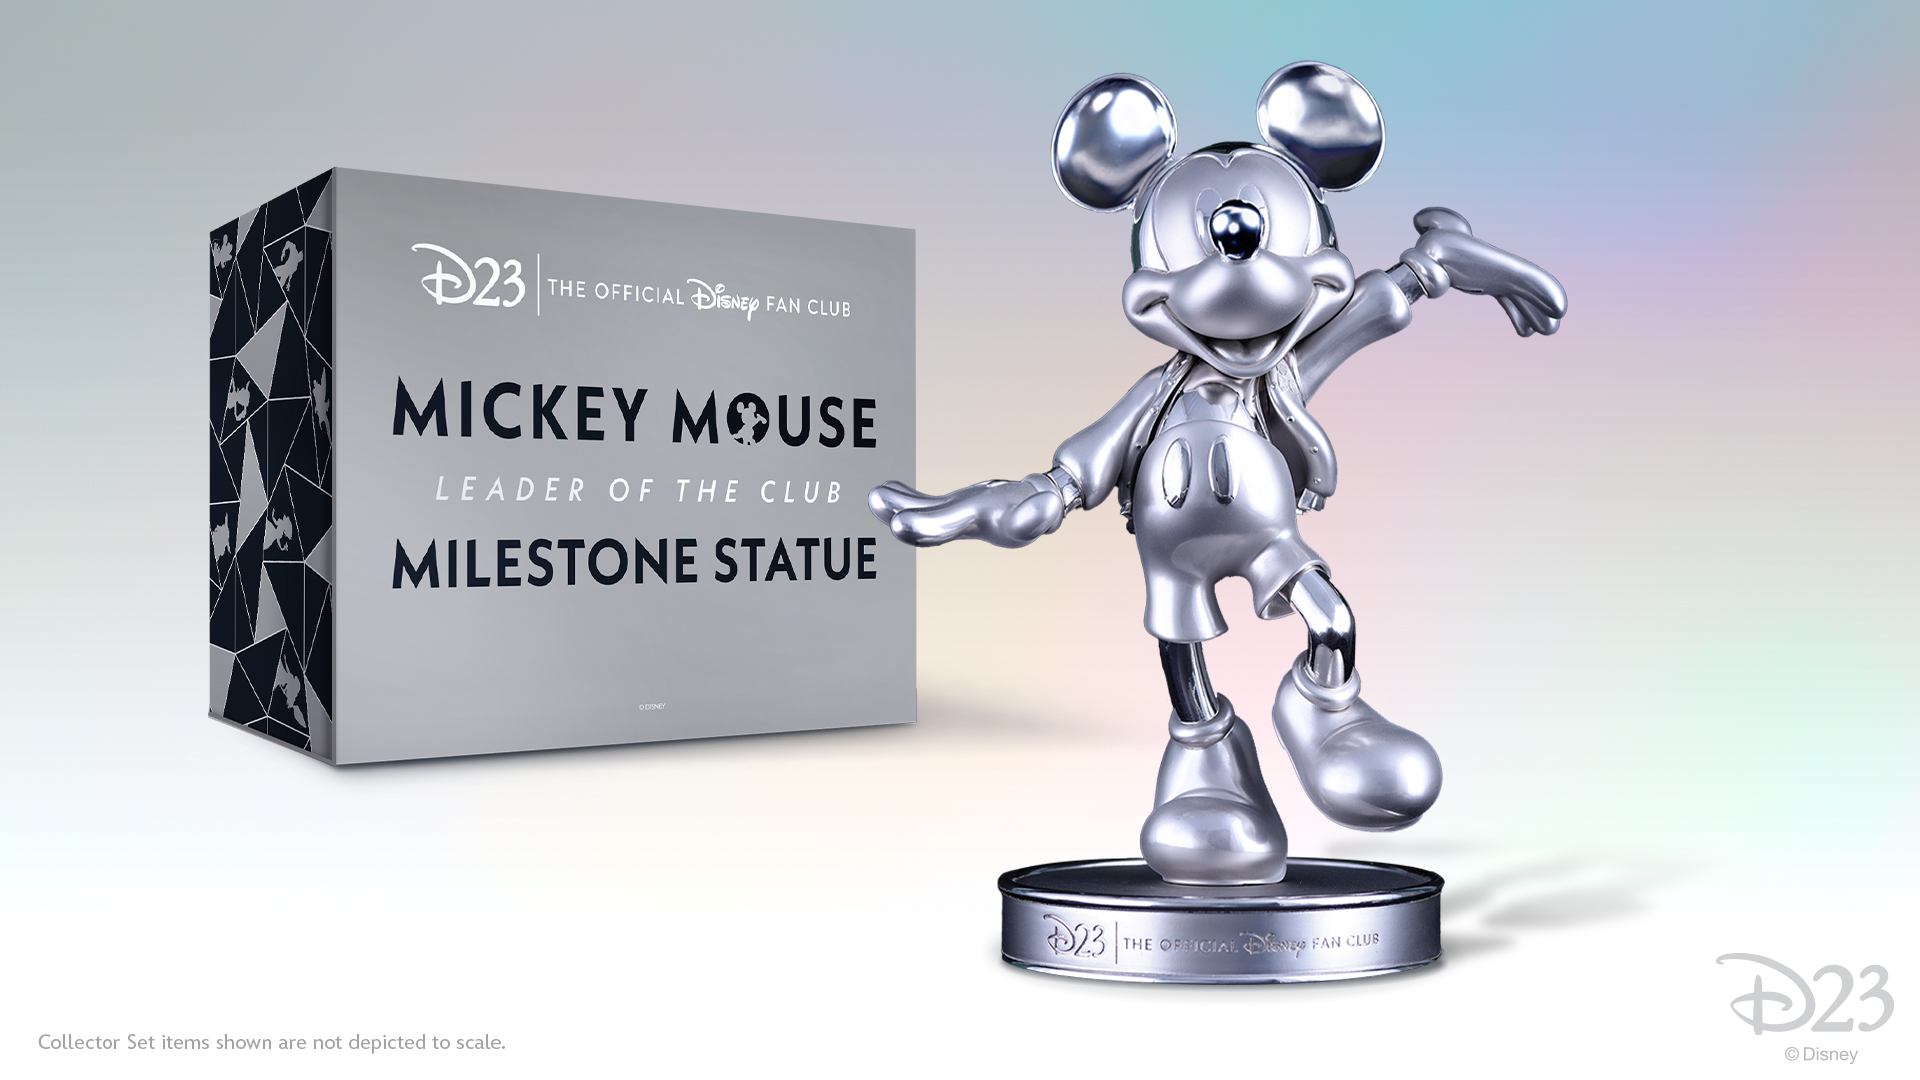 D23: The Official Disney Fan Club Debuts the Mickey Mouse “Leader of the Club” Milestone Statue For 2023 Gold Members